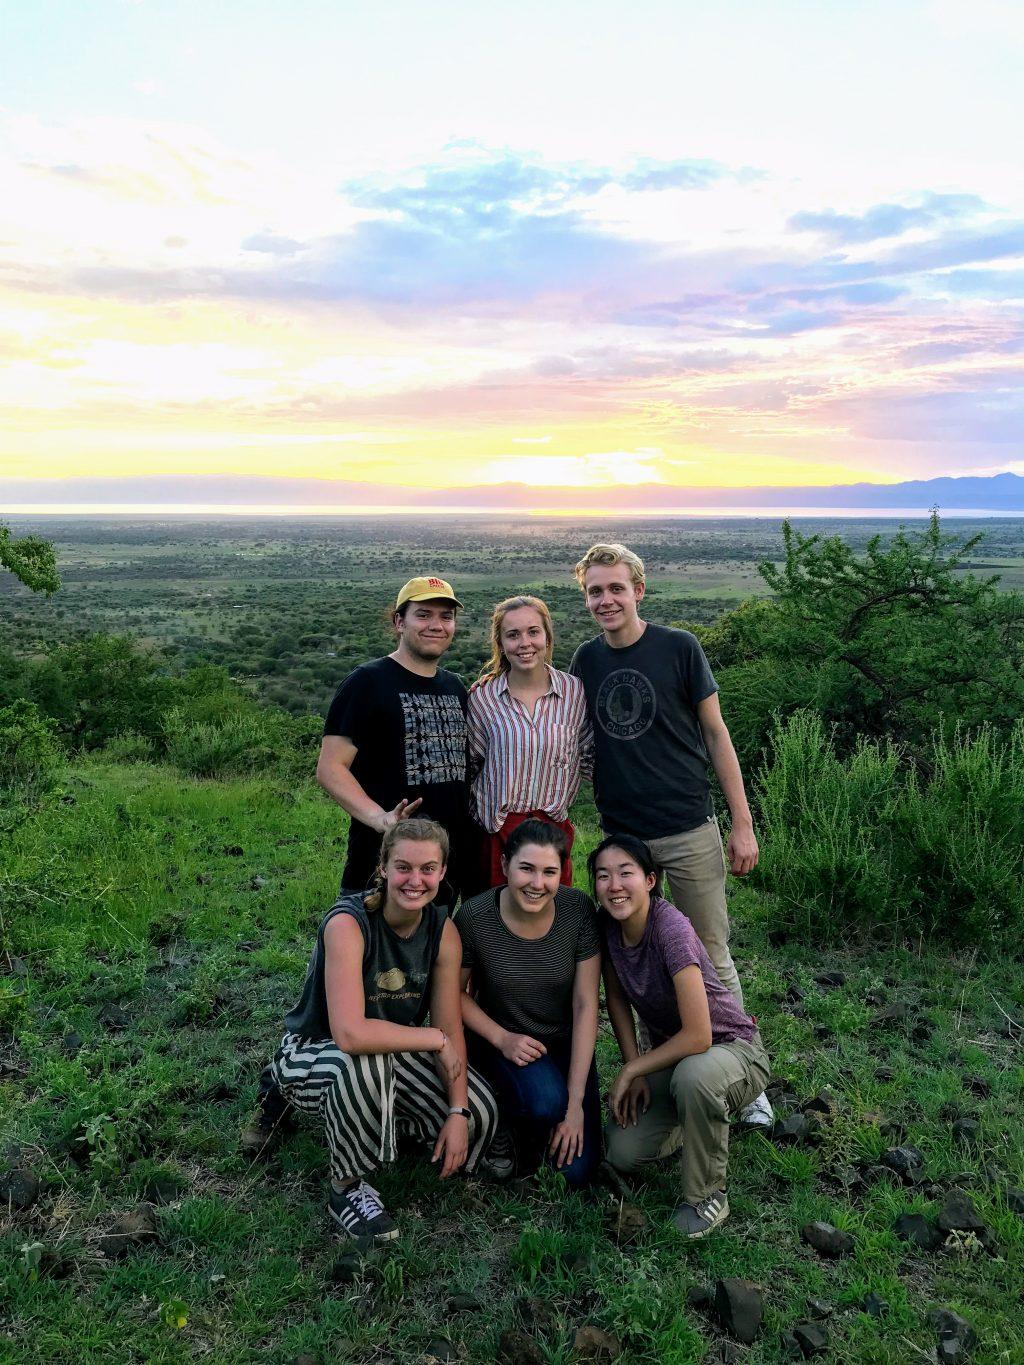 (From top left clockwise) Taylor Mathews, Nicole Huddleston, Andrew Beach, Aracelli Chang, Laiken Shaw and Cooper adventure in Tanzania during their study abroad educational field trip in February 2019. The writer said that one of her favorite Pepperdine experiences was the opportunity to study abroad in Lausanne, Switzerland.